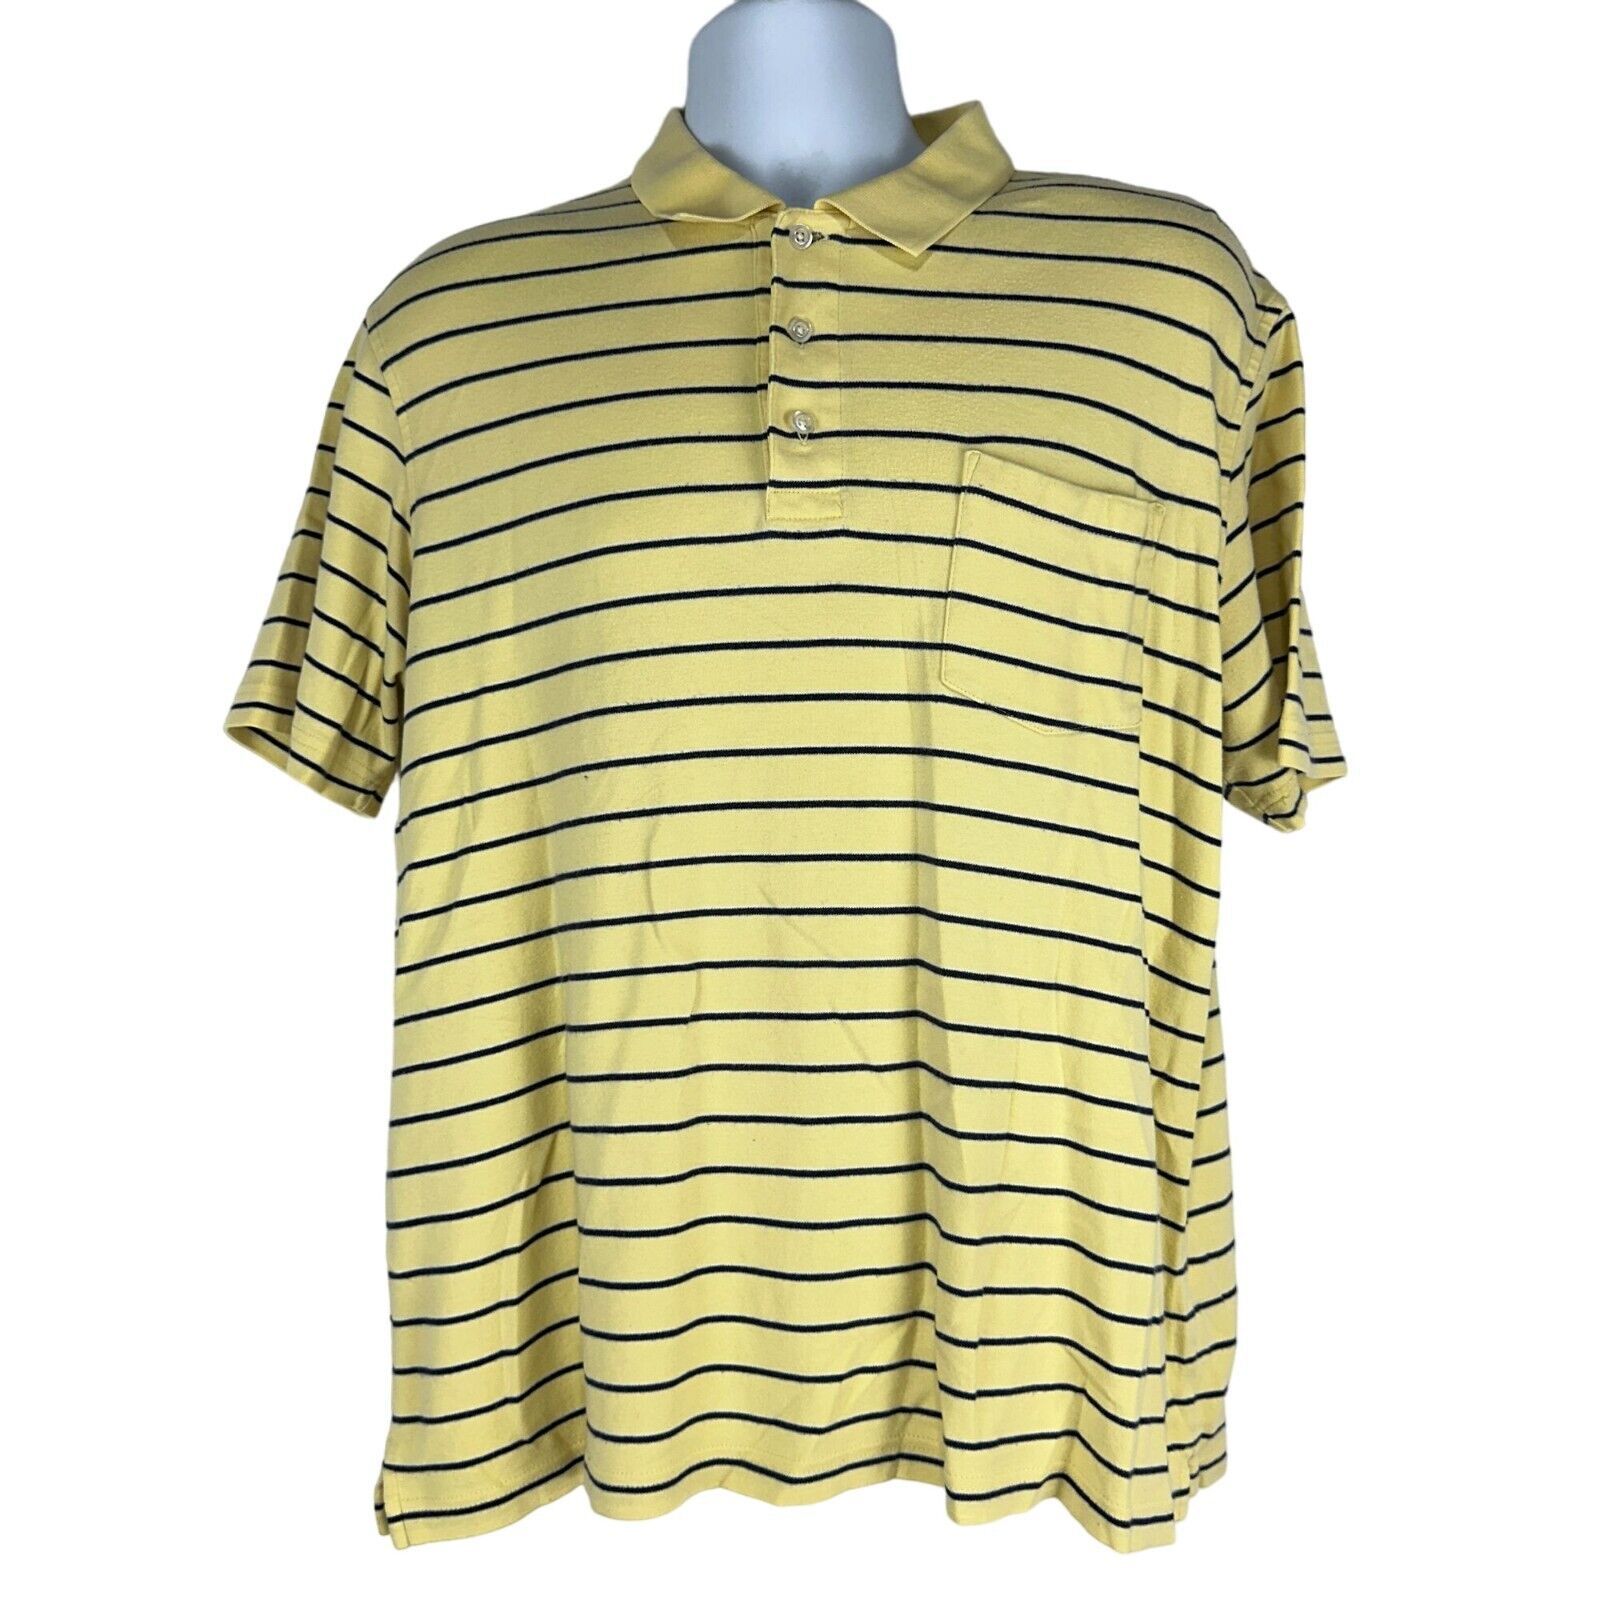 Primary image for Croft & Barrow Men's Polo Shirt Size L Yellow Striped Short Sleeved